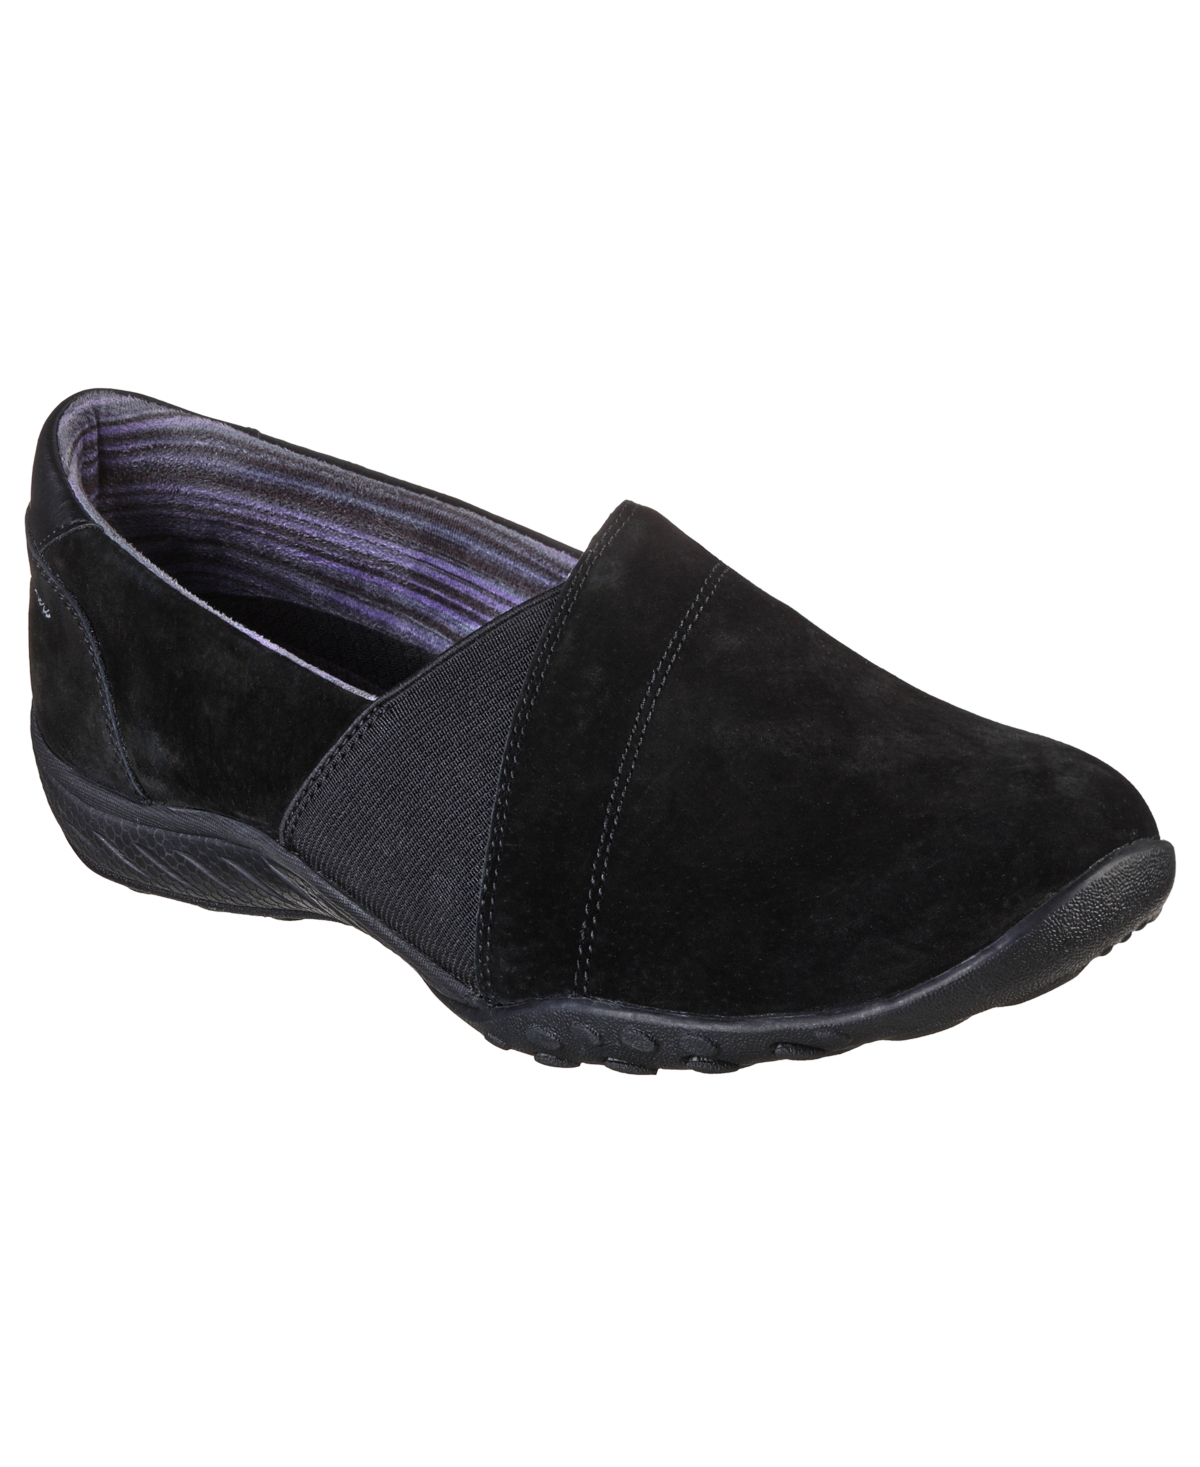 Women's Relaxed Fit: Breathe-Easy - Kindred Slip-On Casual Sneakers from Finish Line - Black